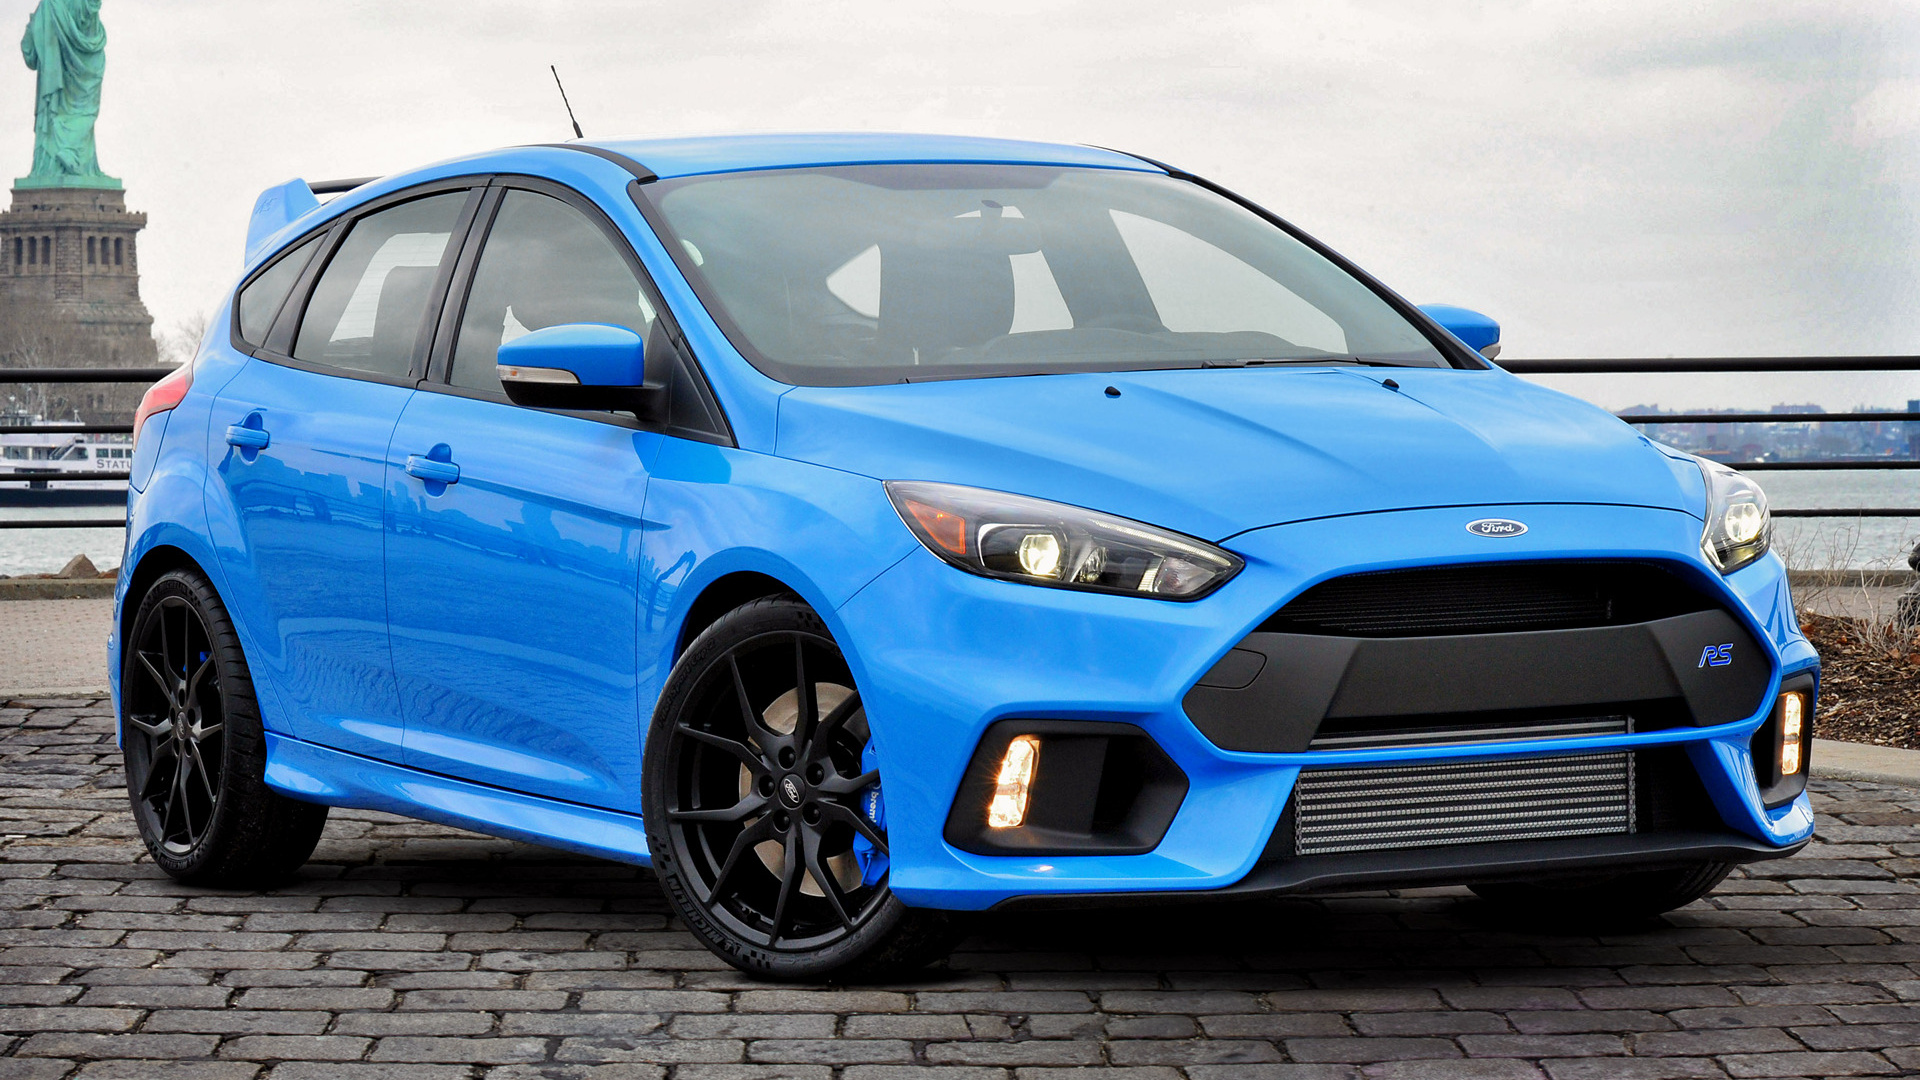 Ford Focus RS 2016 US Wallpapers and HD Images